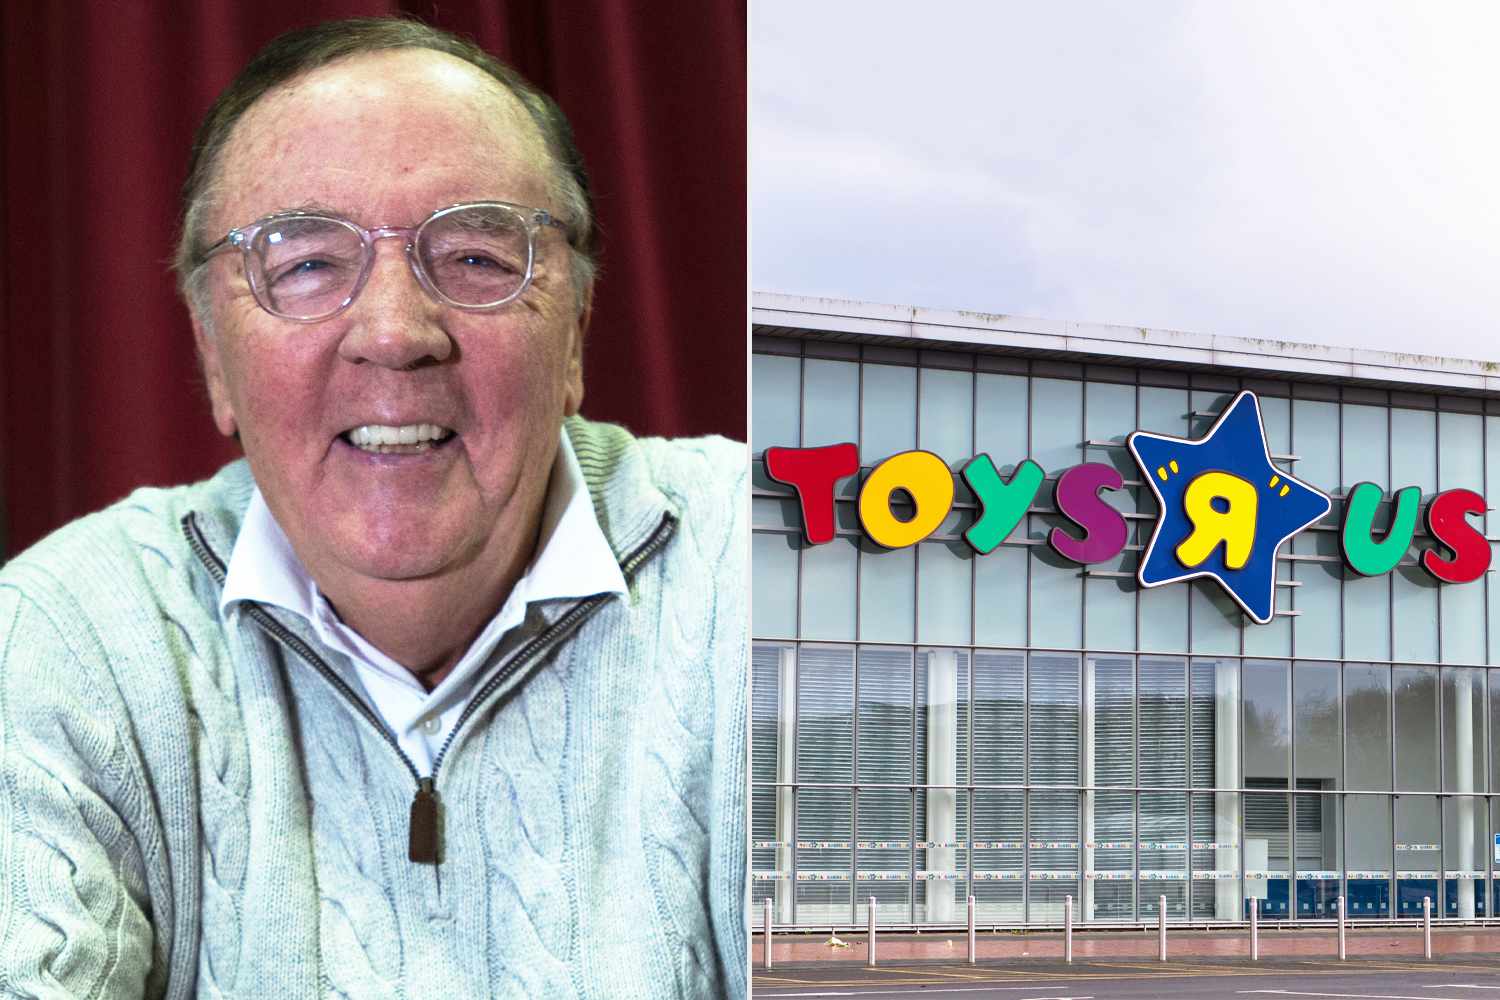 Author James Patterson Reminisces About His Surprise Side Gig: Writing the Toys "R" Us Jingle